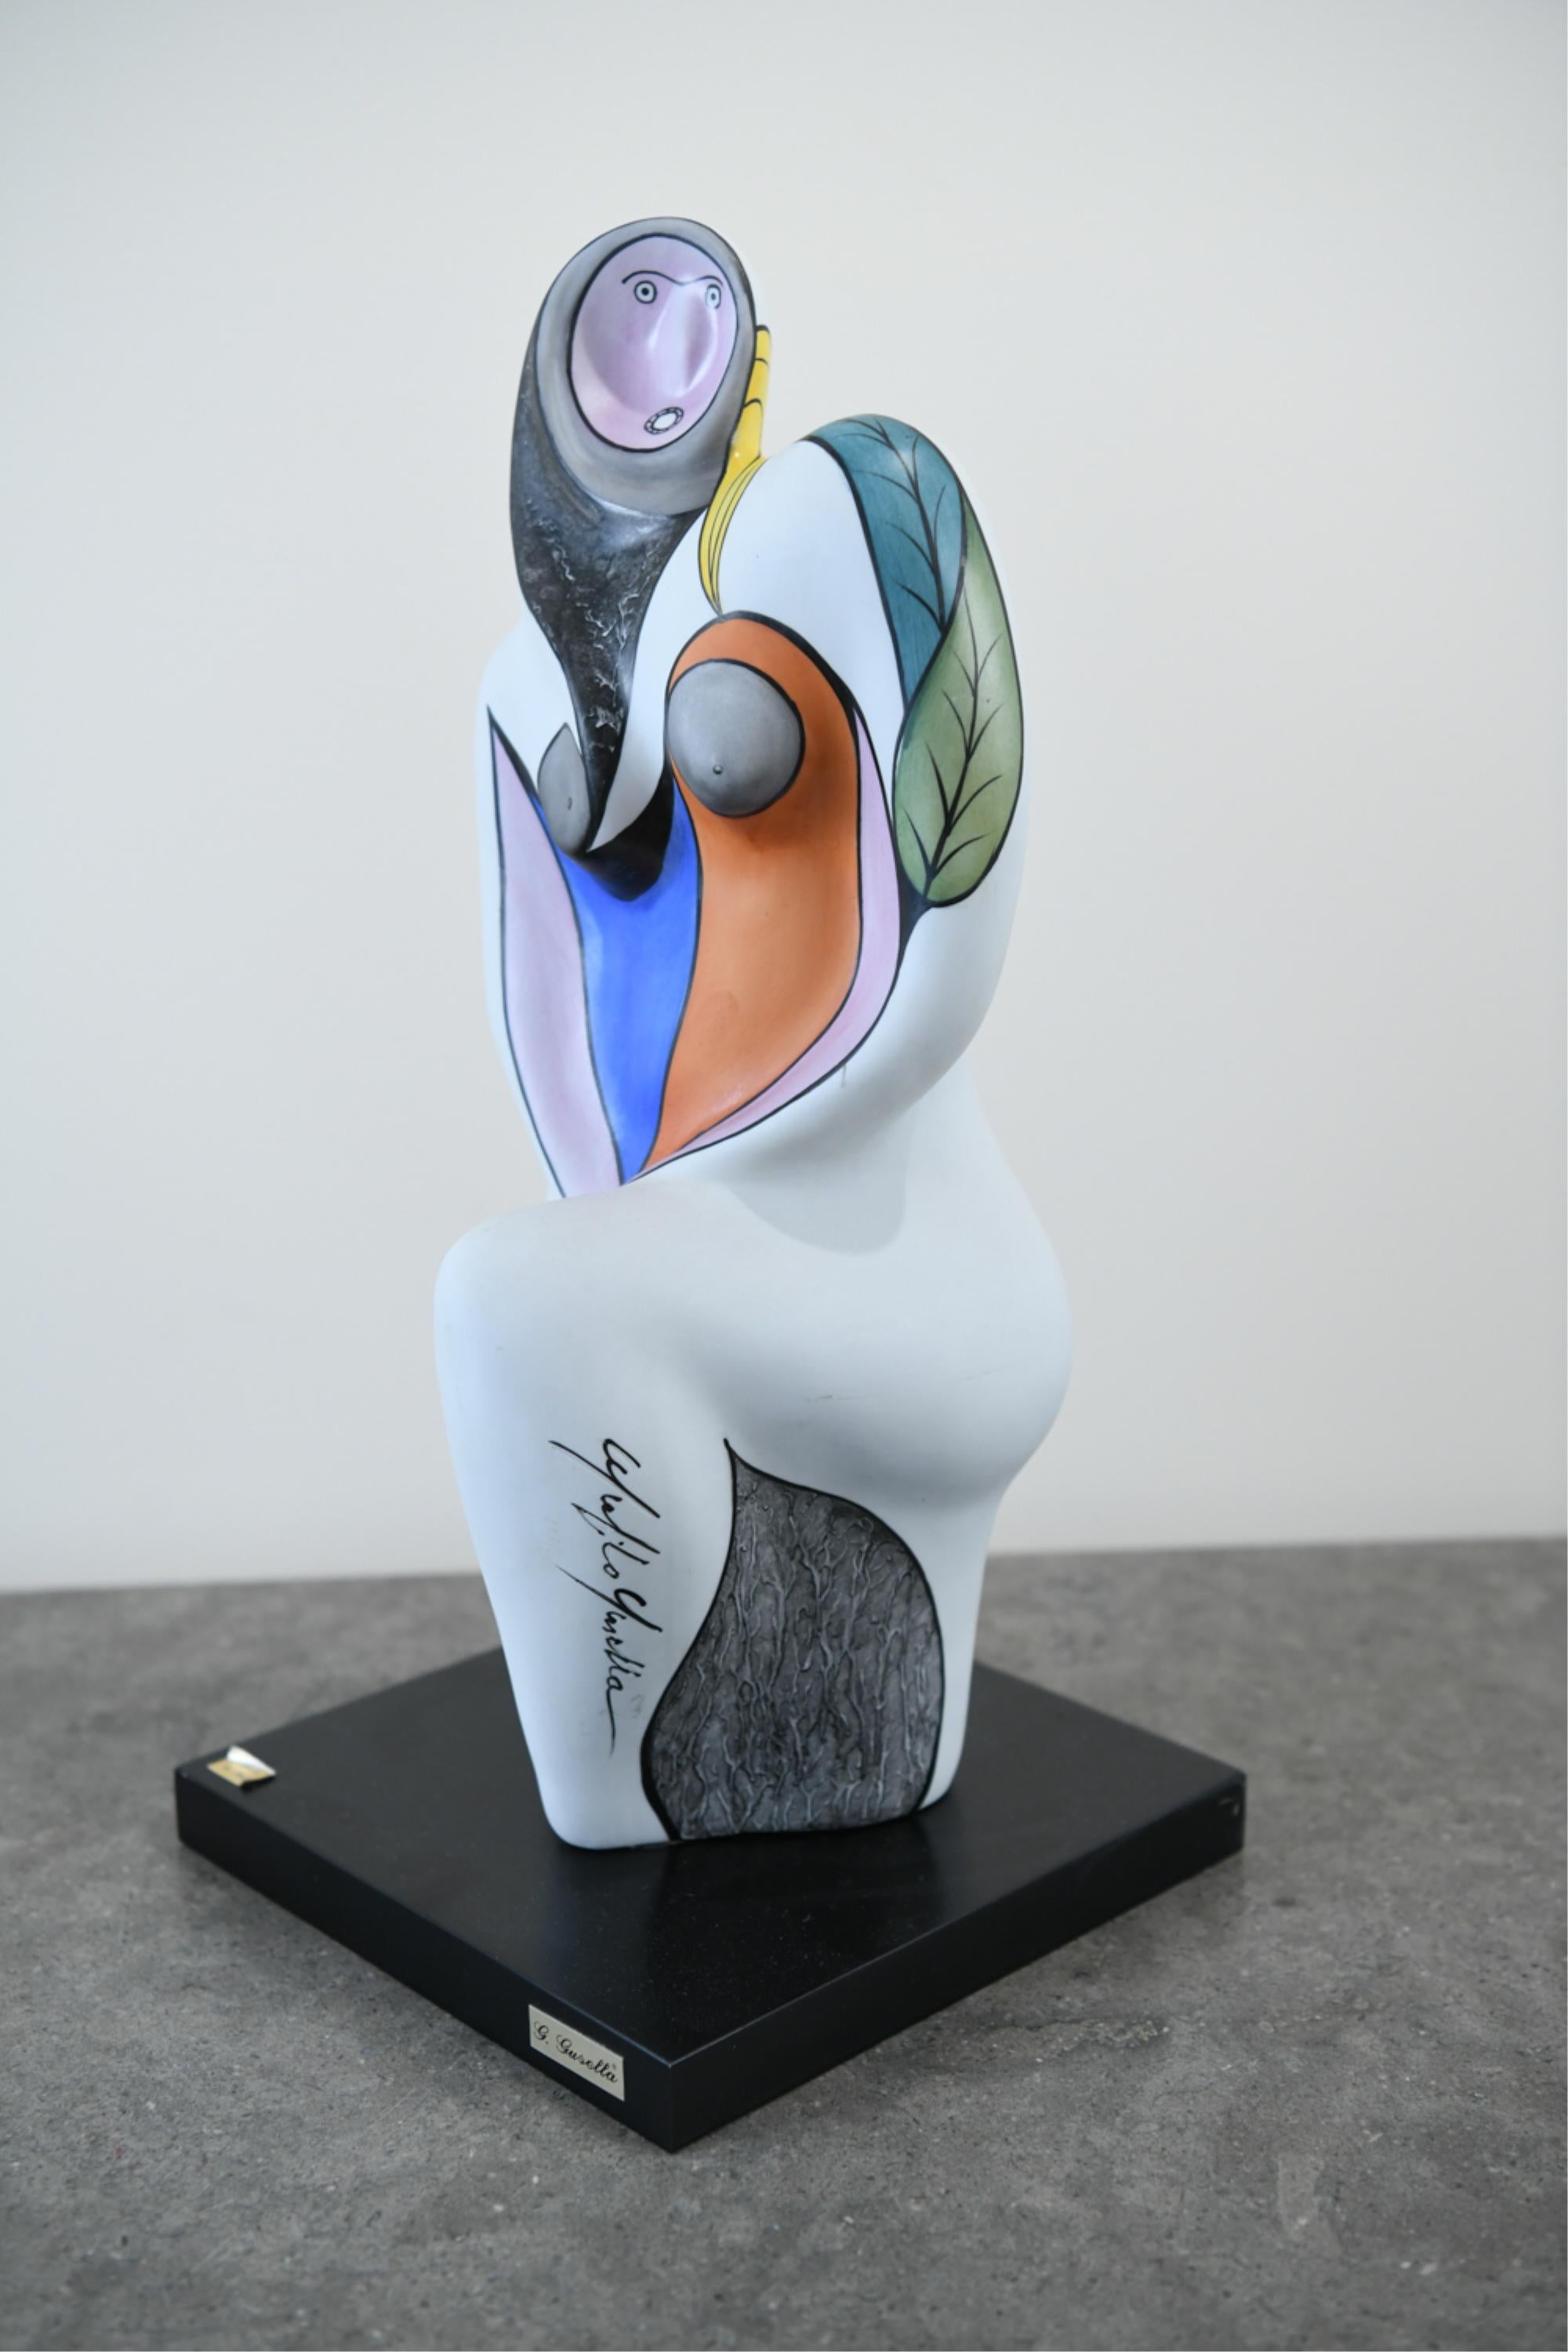 Hand-Painted G. Gusella, Figurative Hand Painted Ceramic Sculpture, circa 1980s